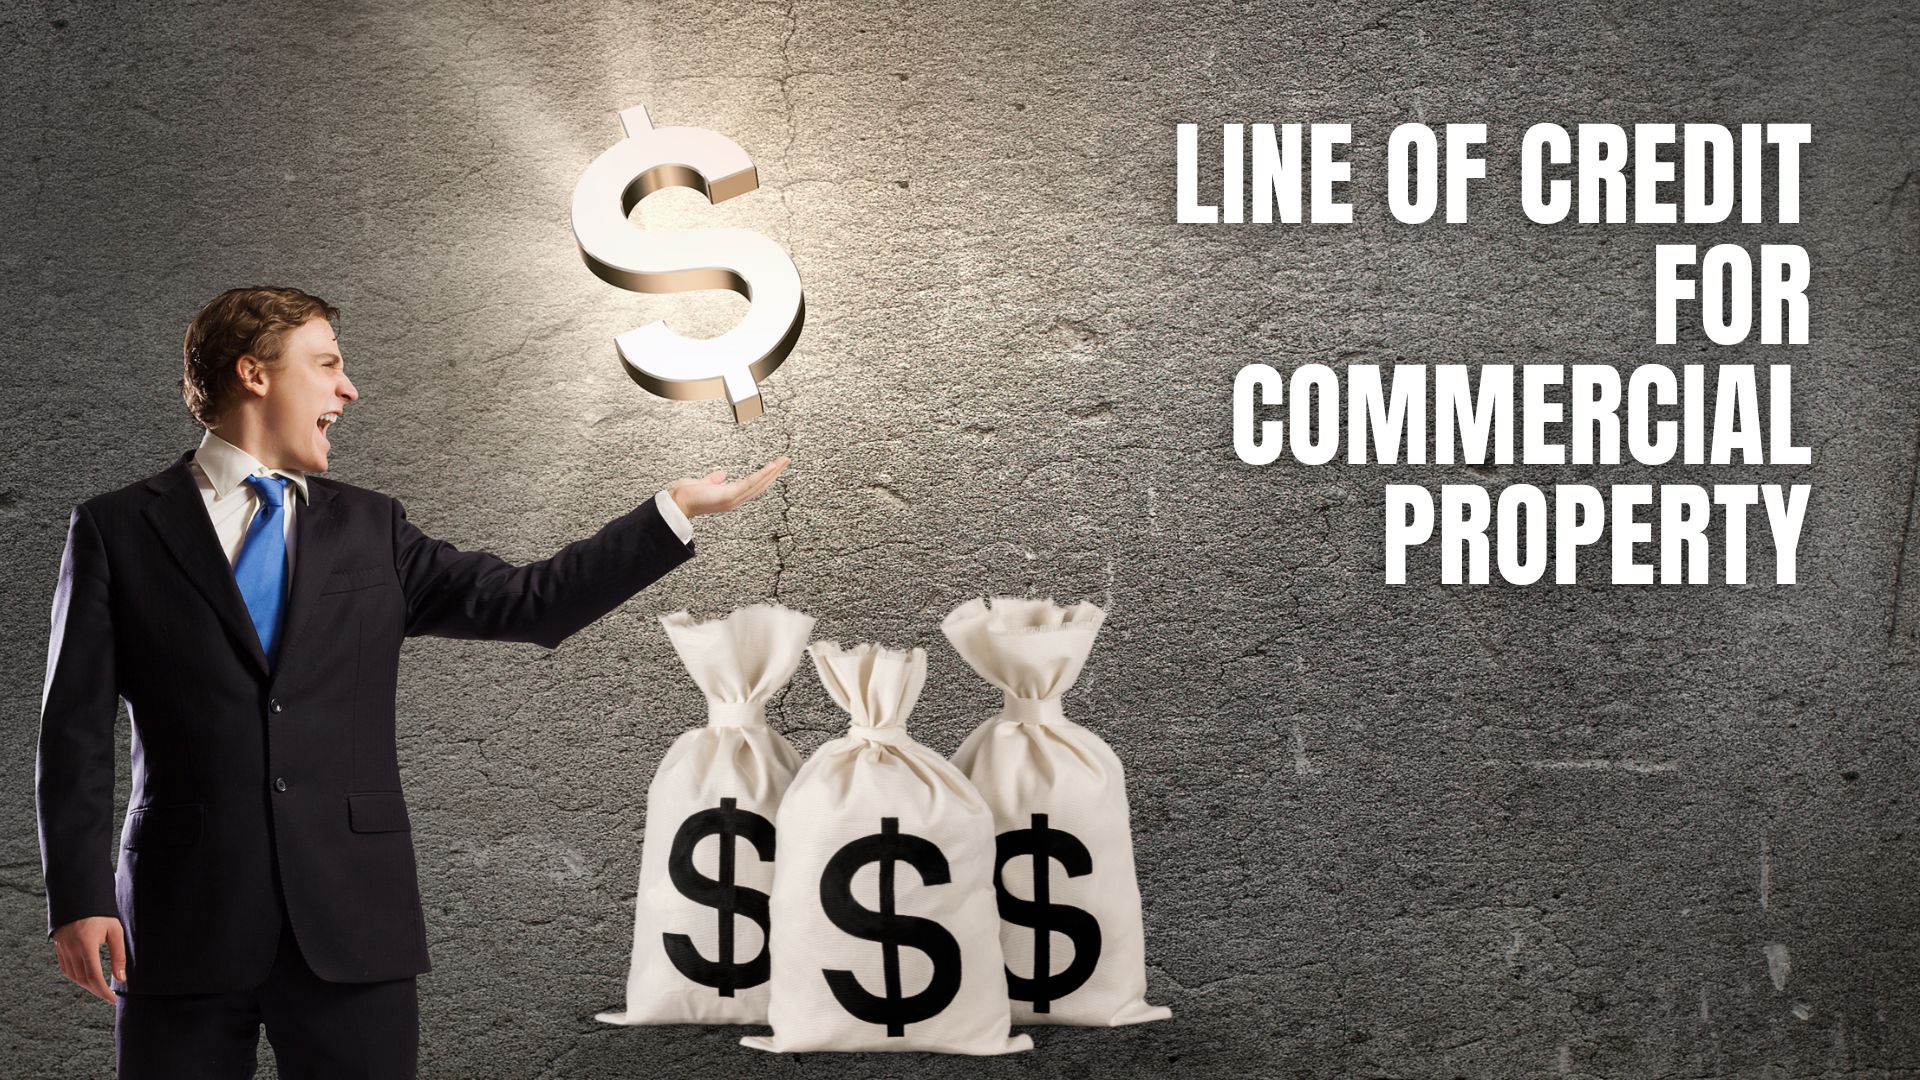 Line of Credit for Commercial Property